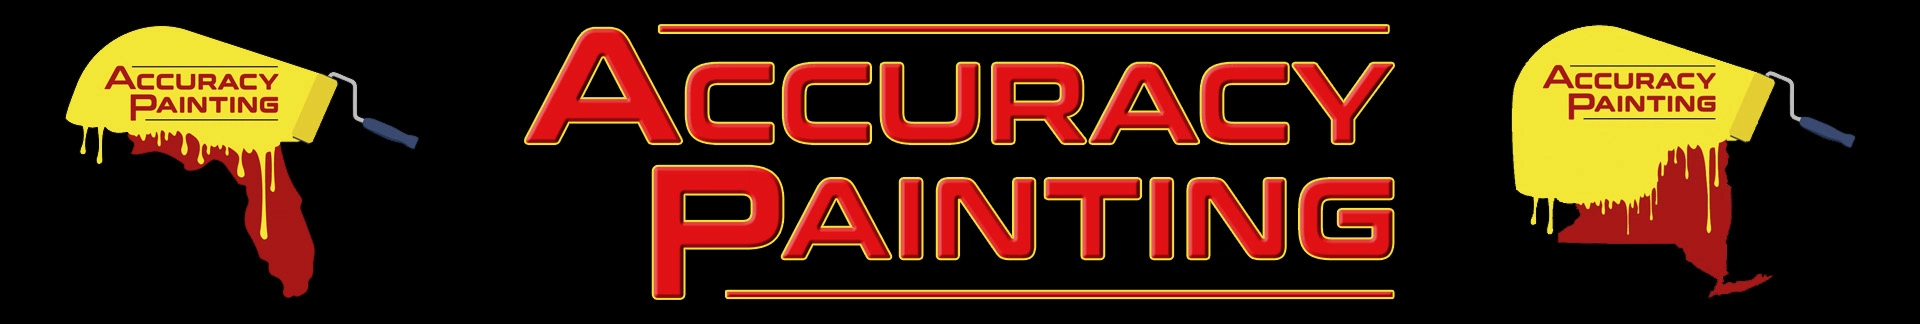 Accuracy Painting Logo